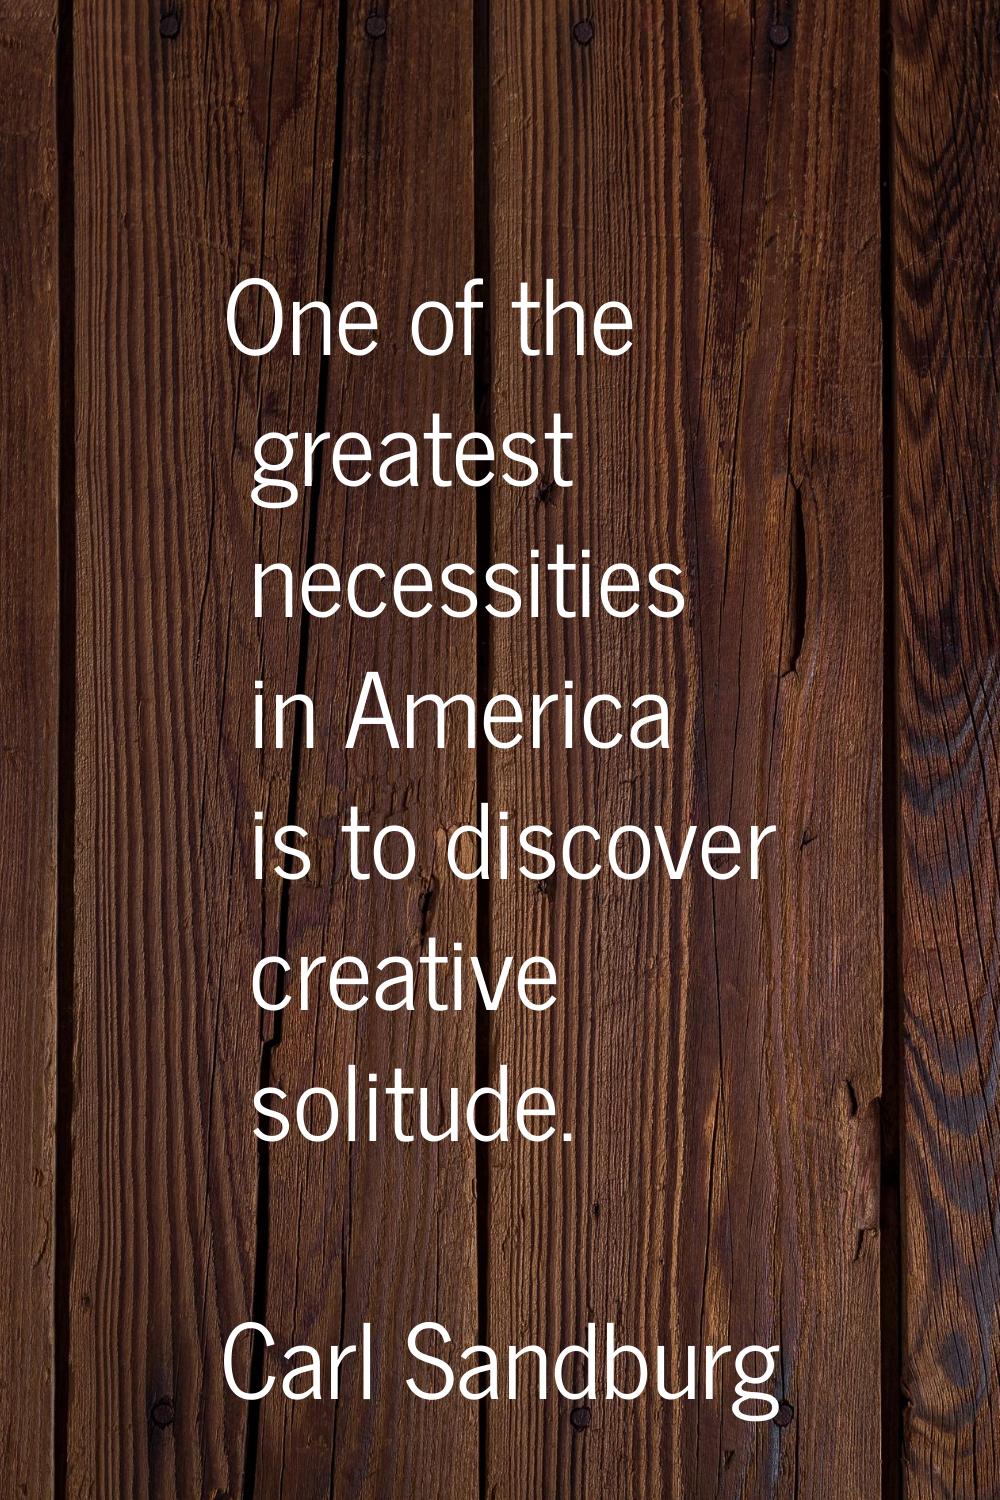 One of the greatest necessities in America is to discover creative solitude.